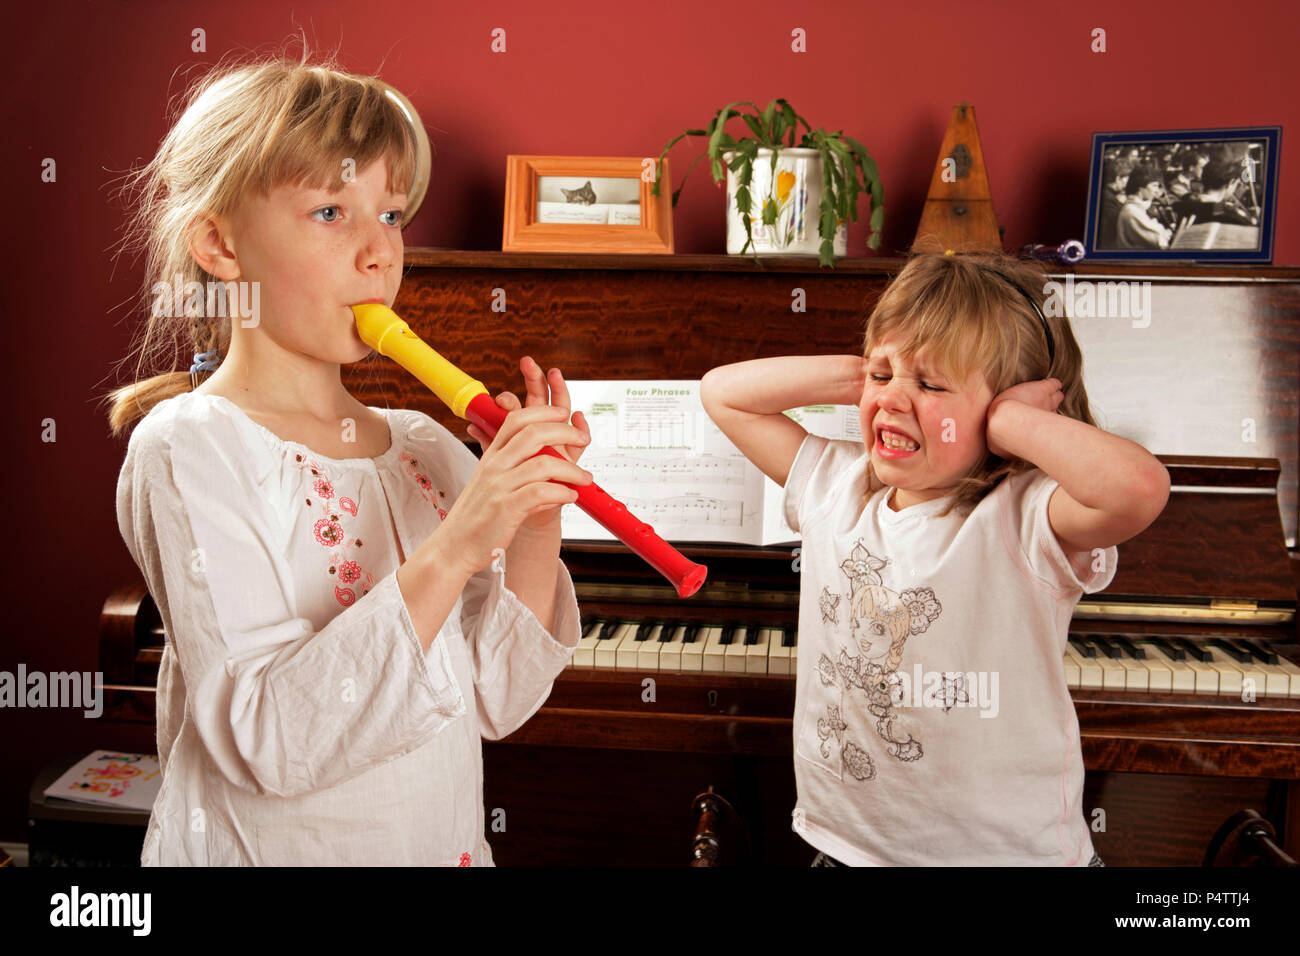 Young girl playing the recorder, whilst the other shows her appreciation Stock Photo